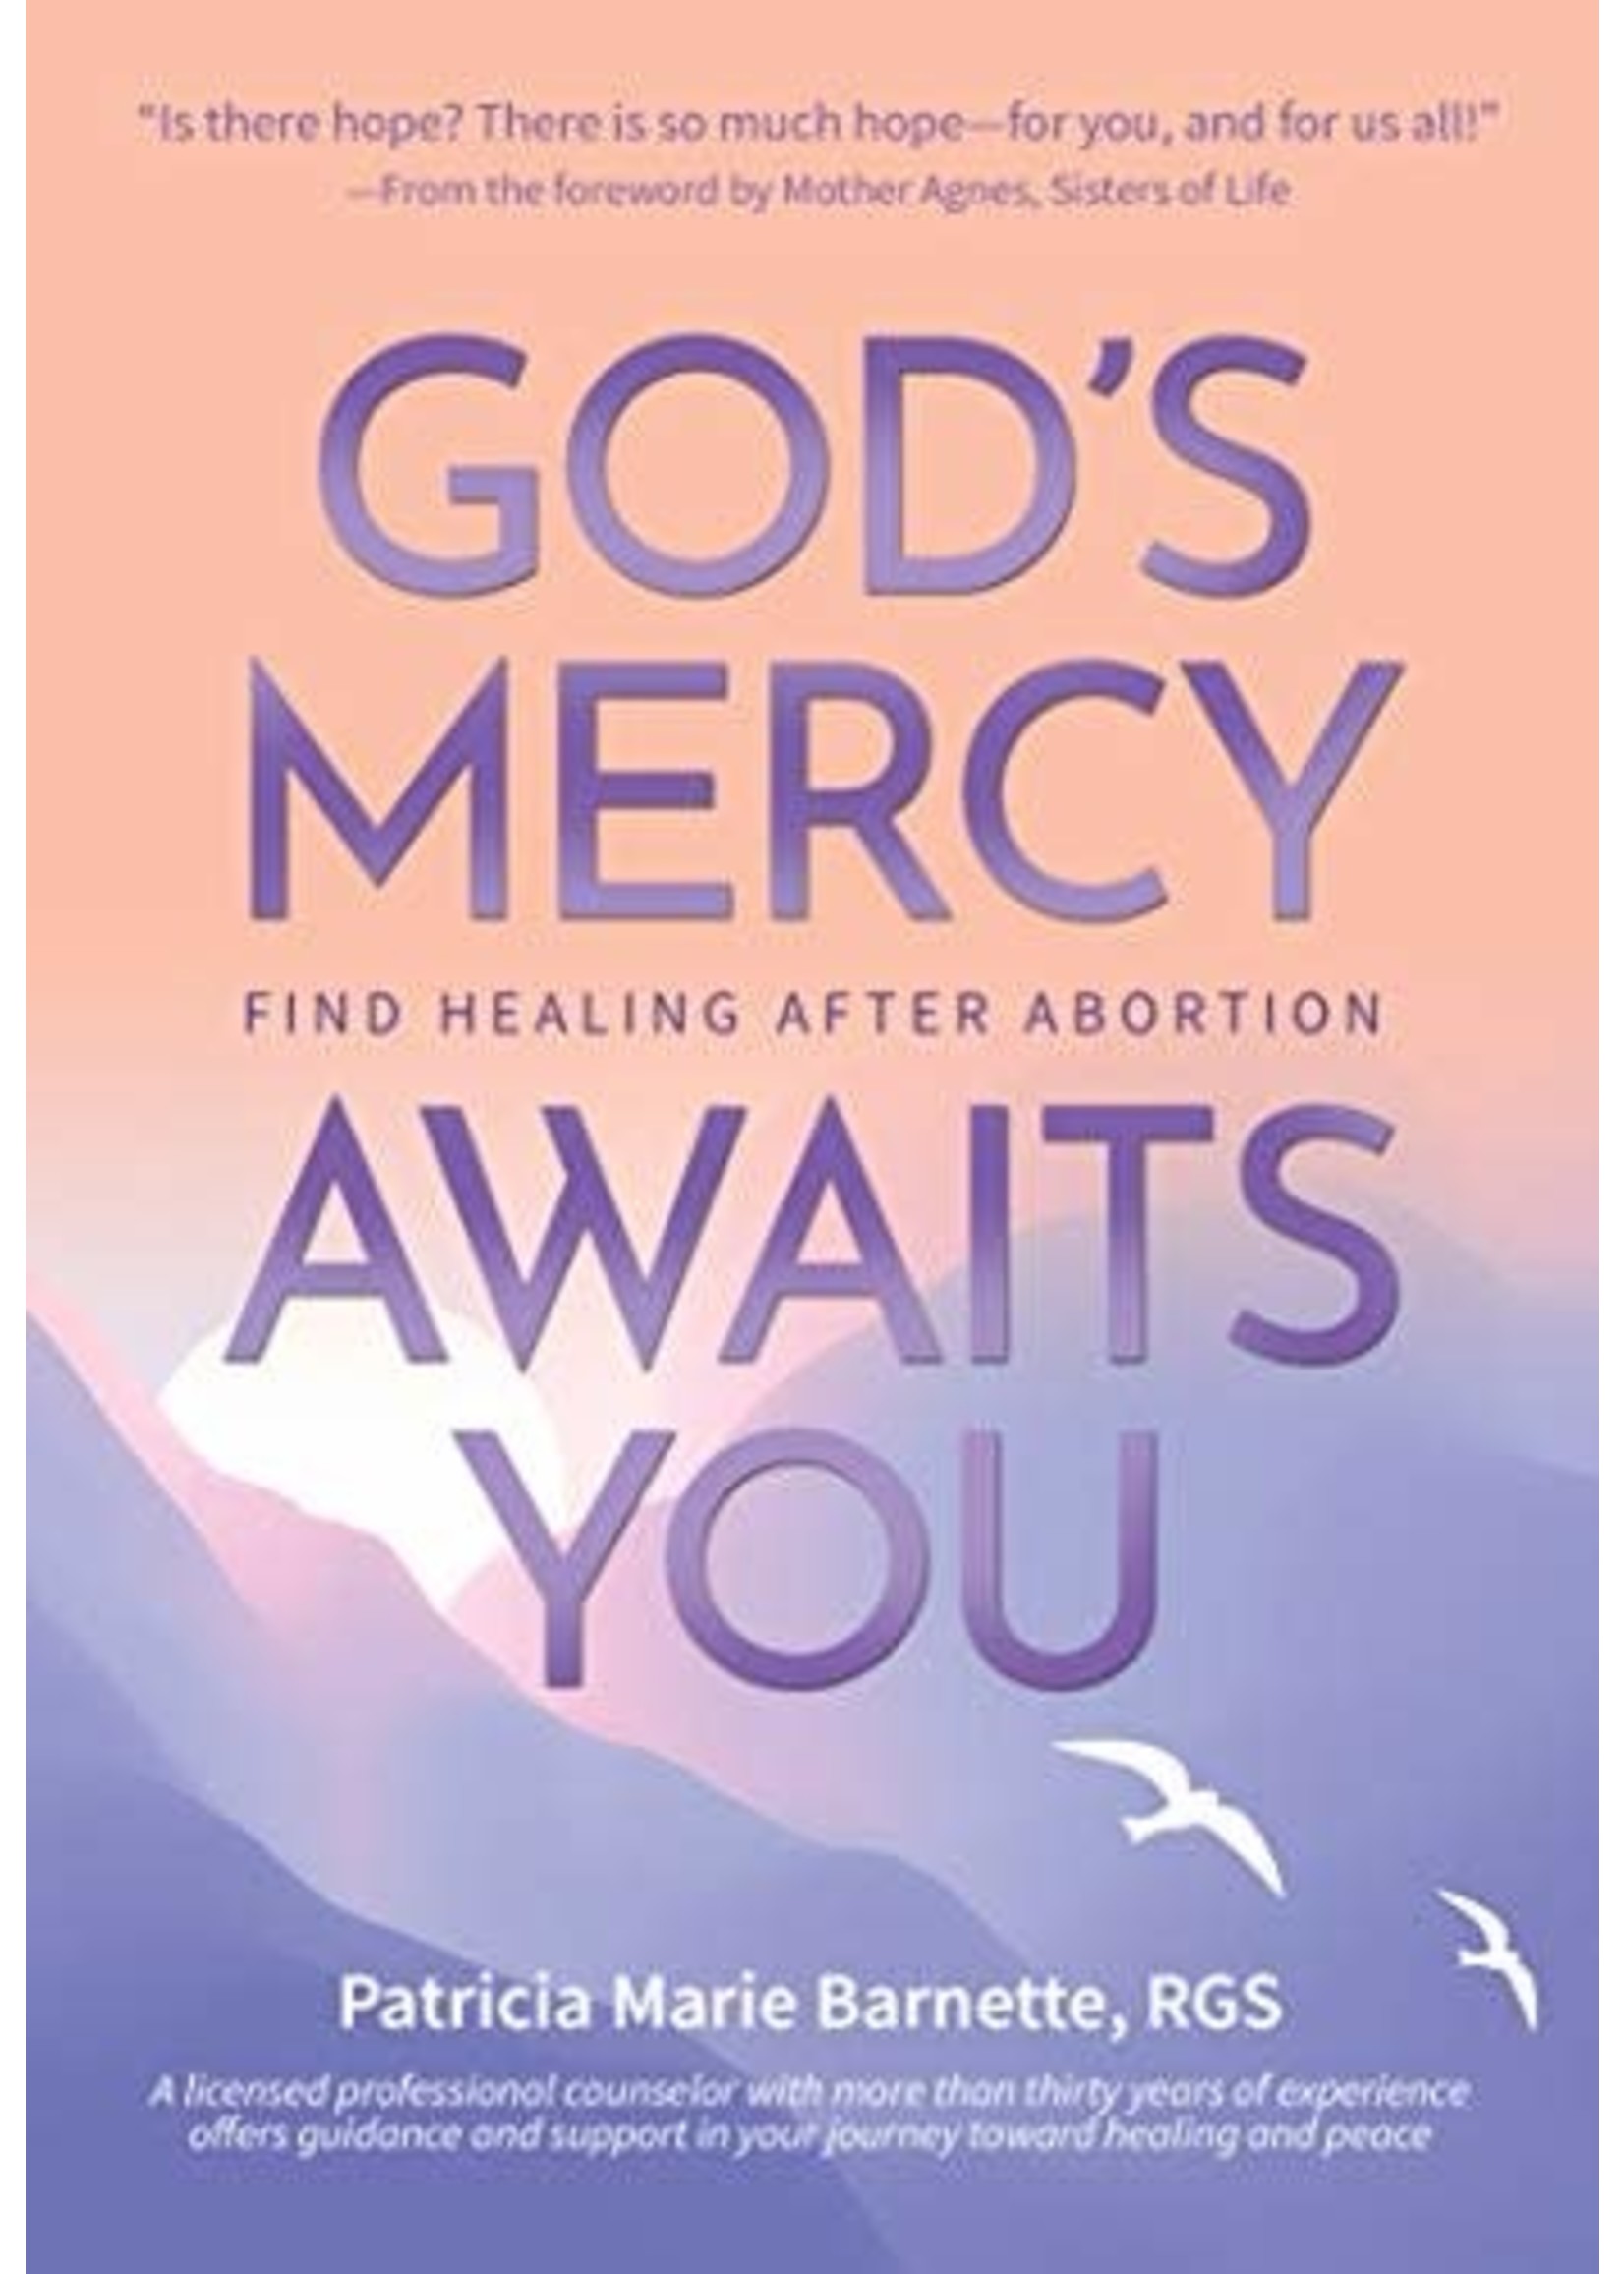 Gods Mercy Awaits You: Finding Healing After Abortion